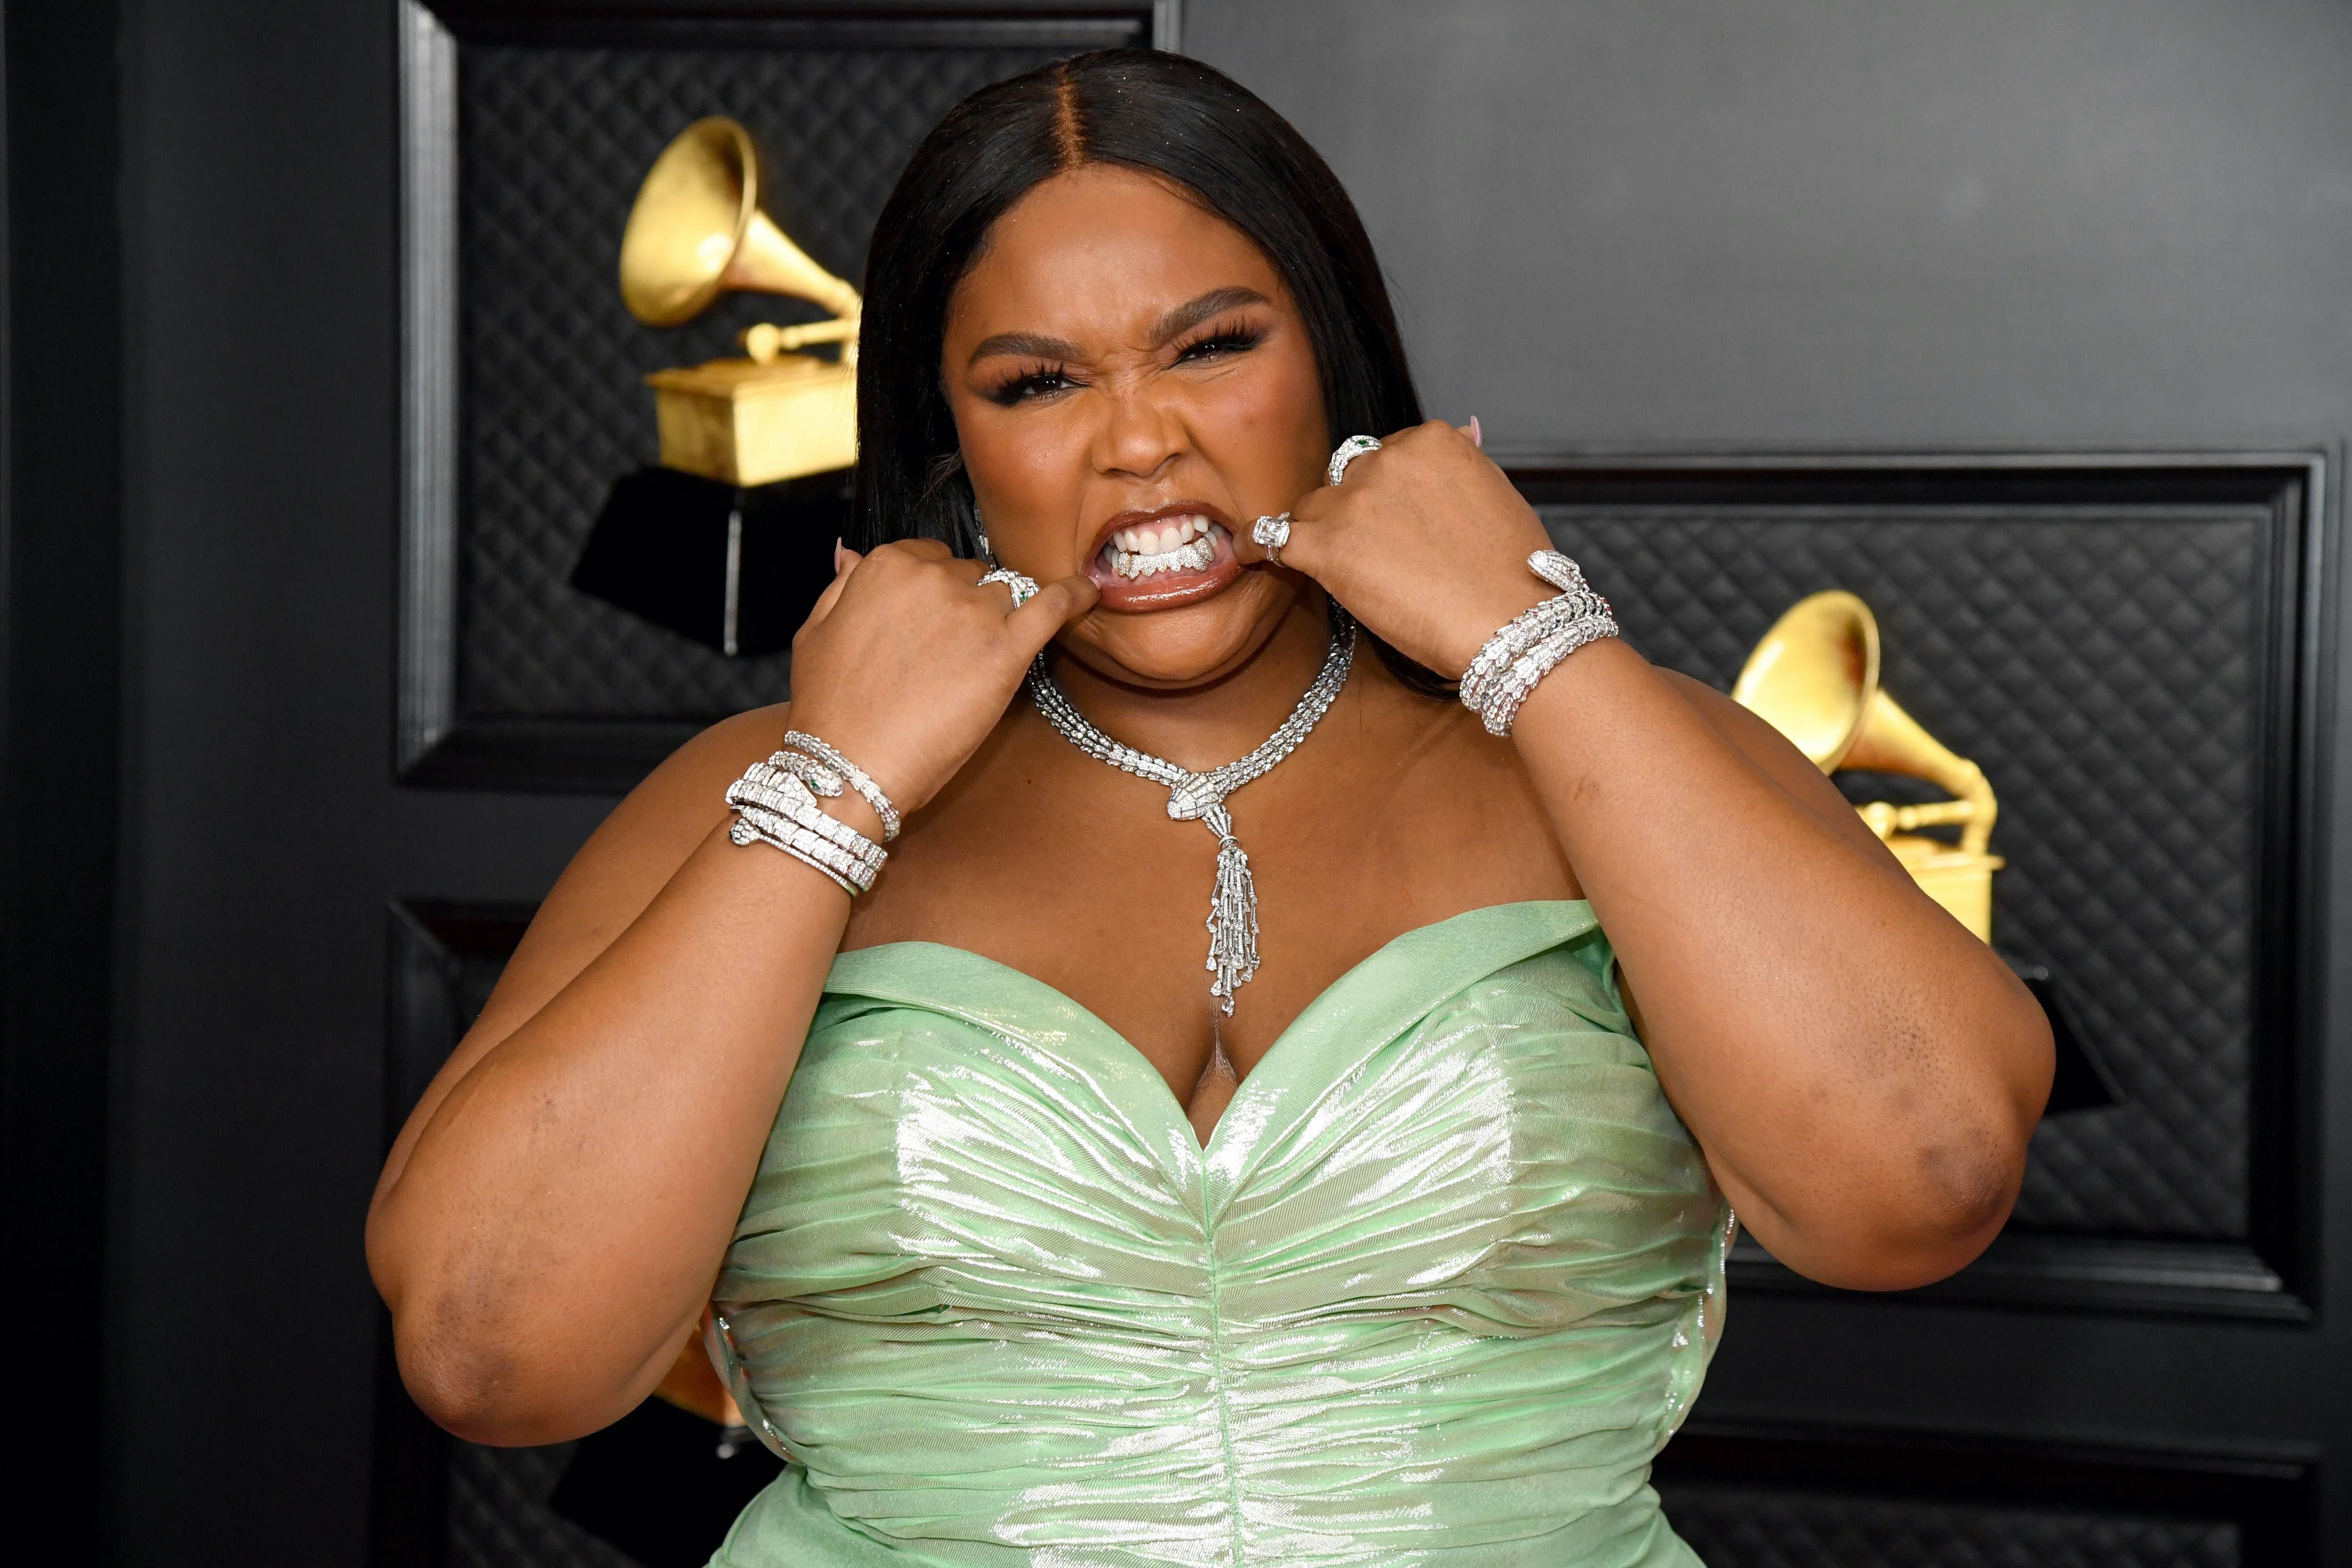 Lizzo shows off teeth at 2021 GRAMMY Awards